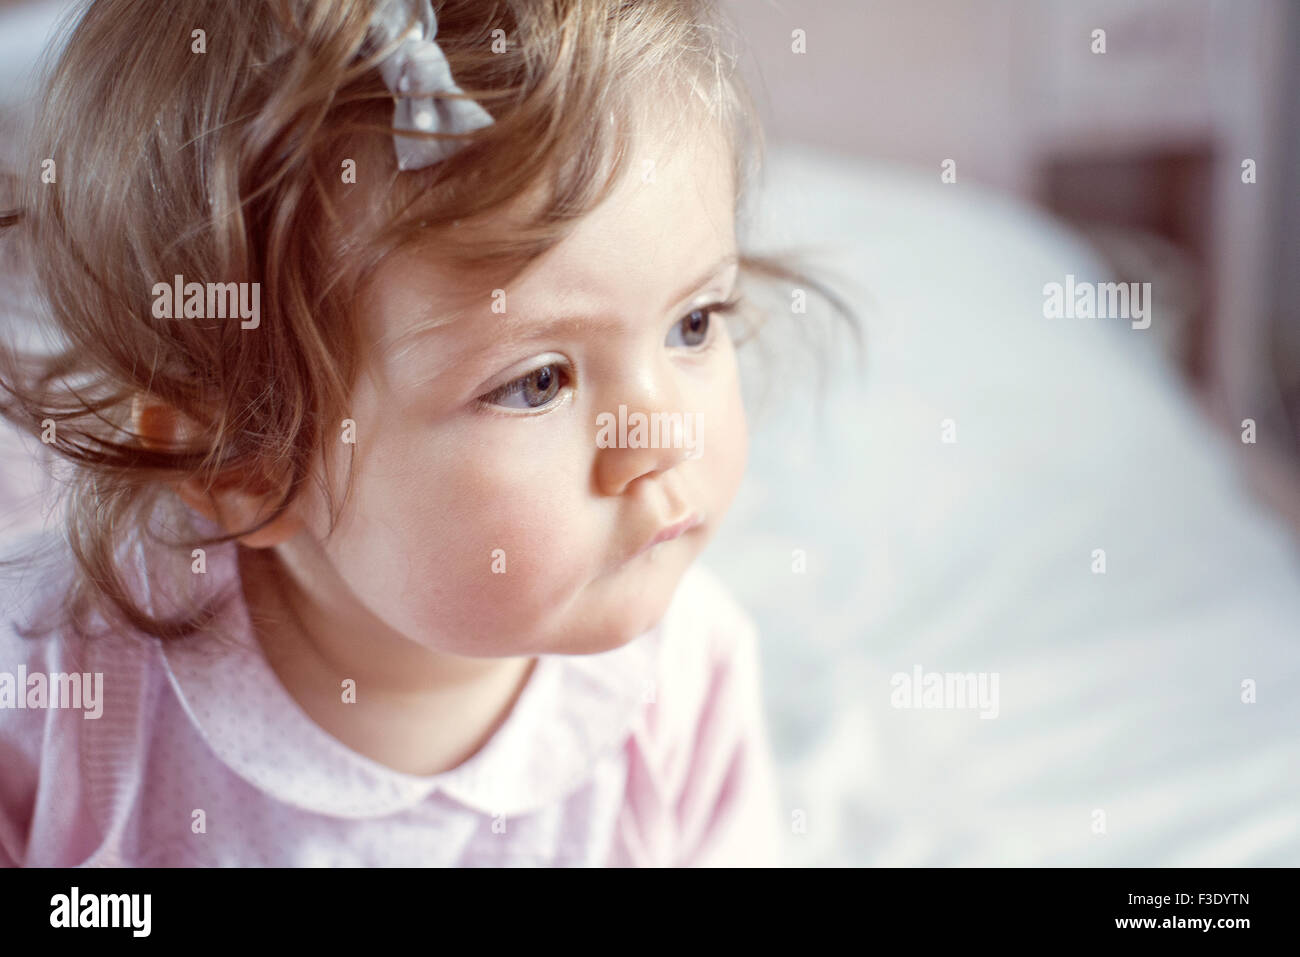 Baby girl looking away in thought, portrait Stock Photo